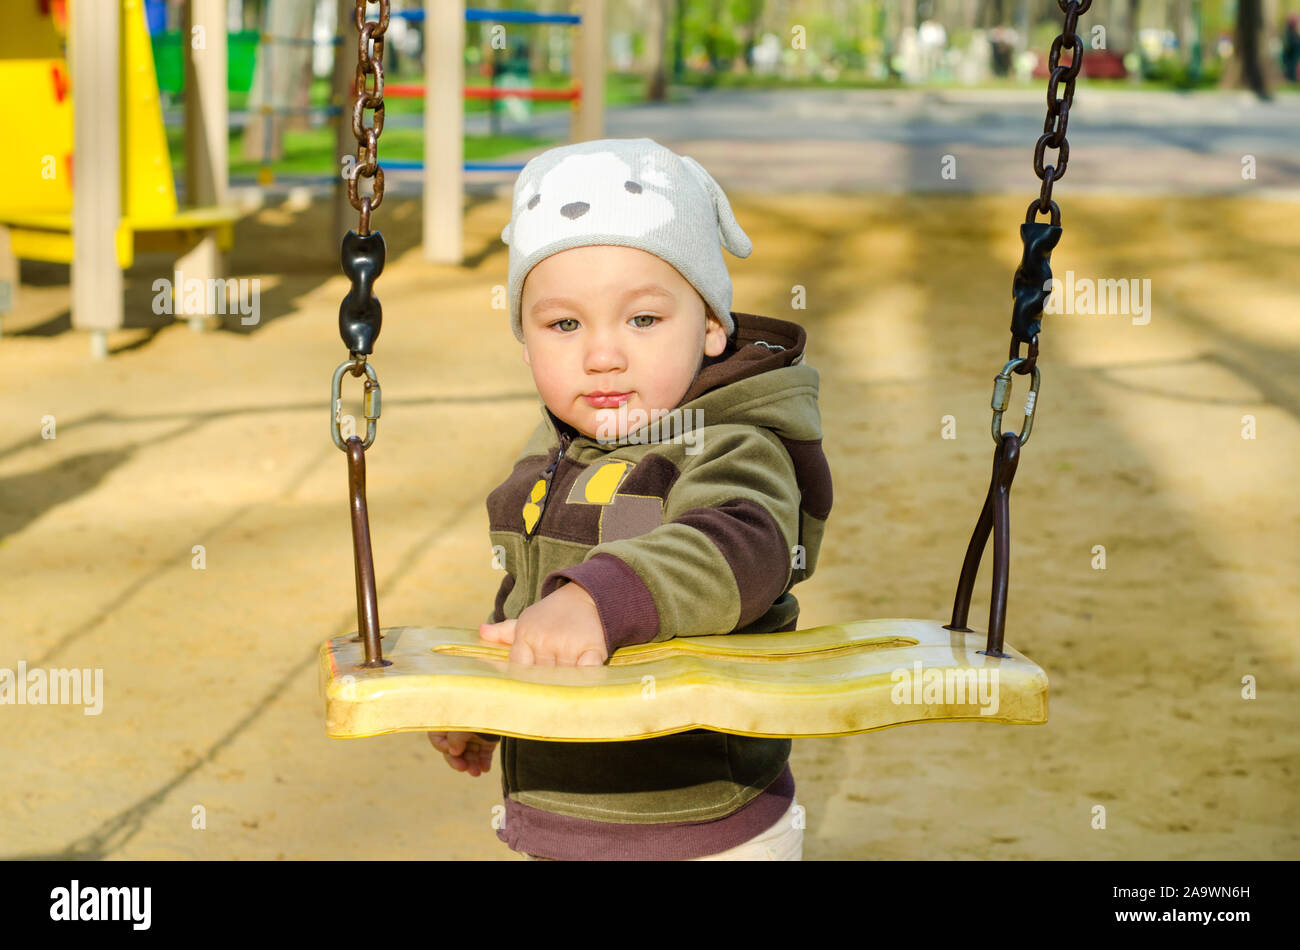 little boy at the playground Stock Photo